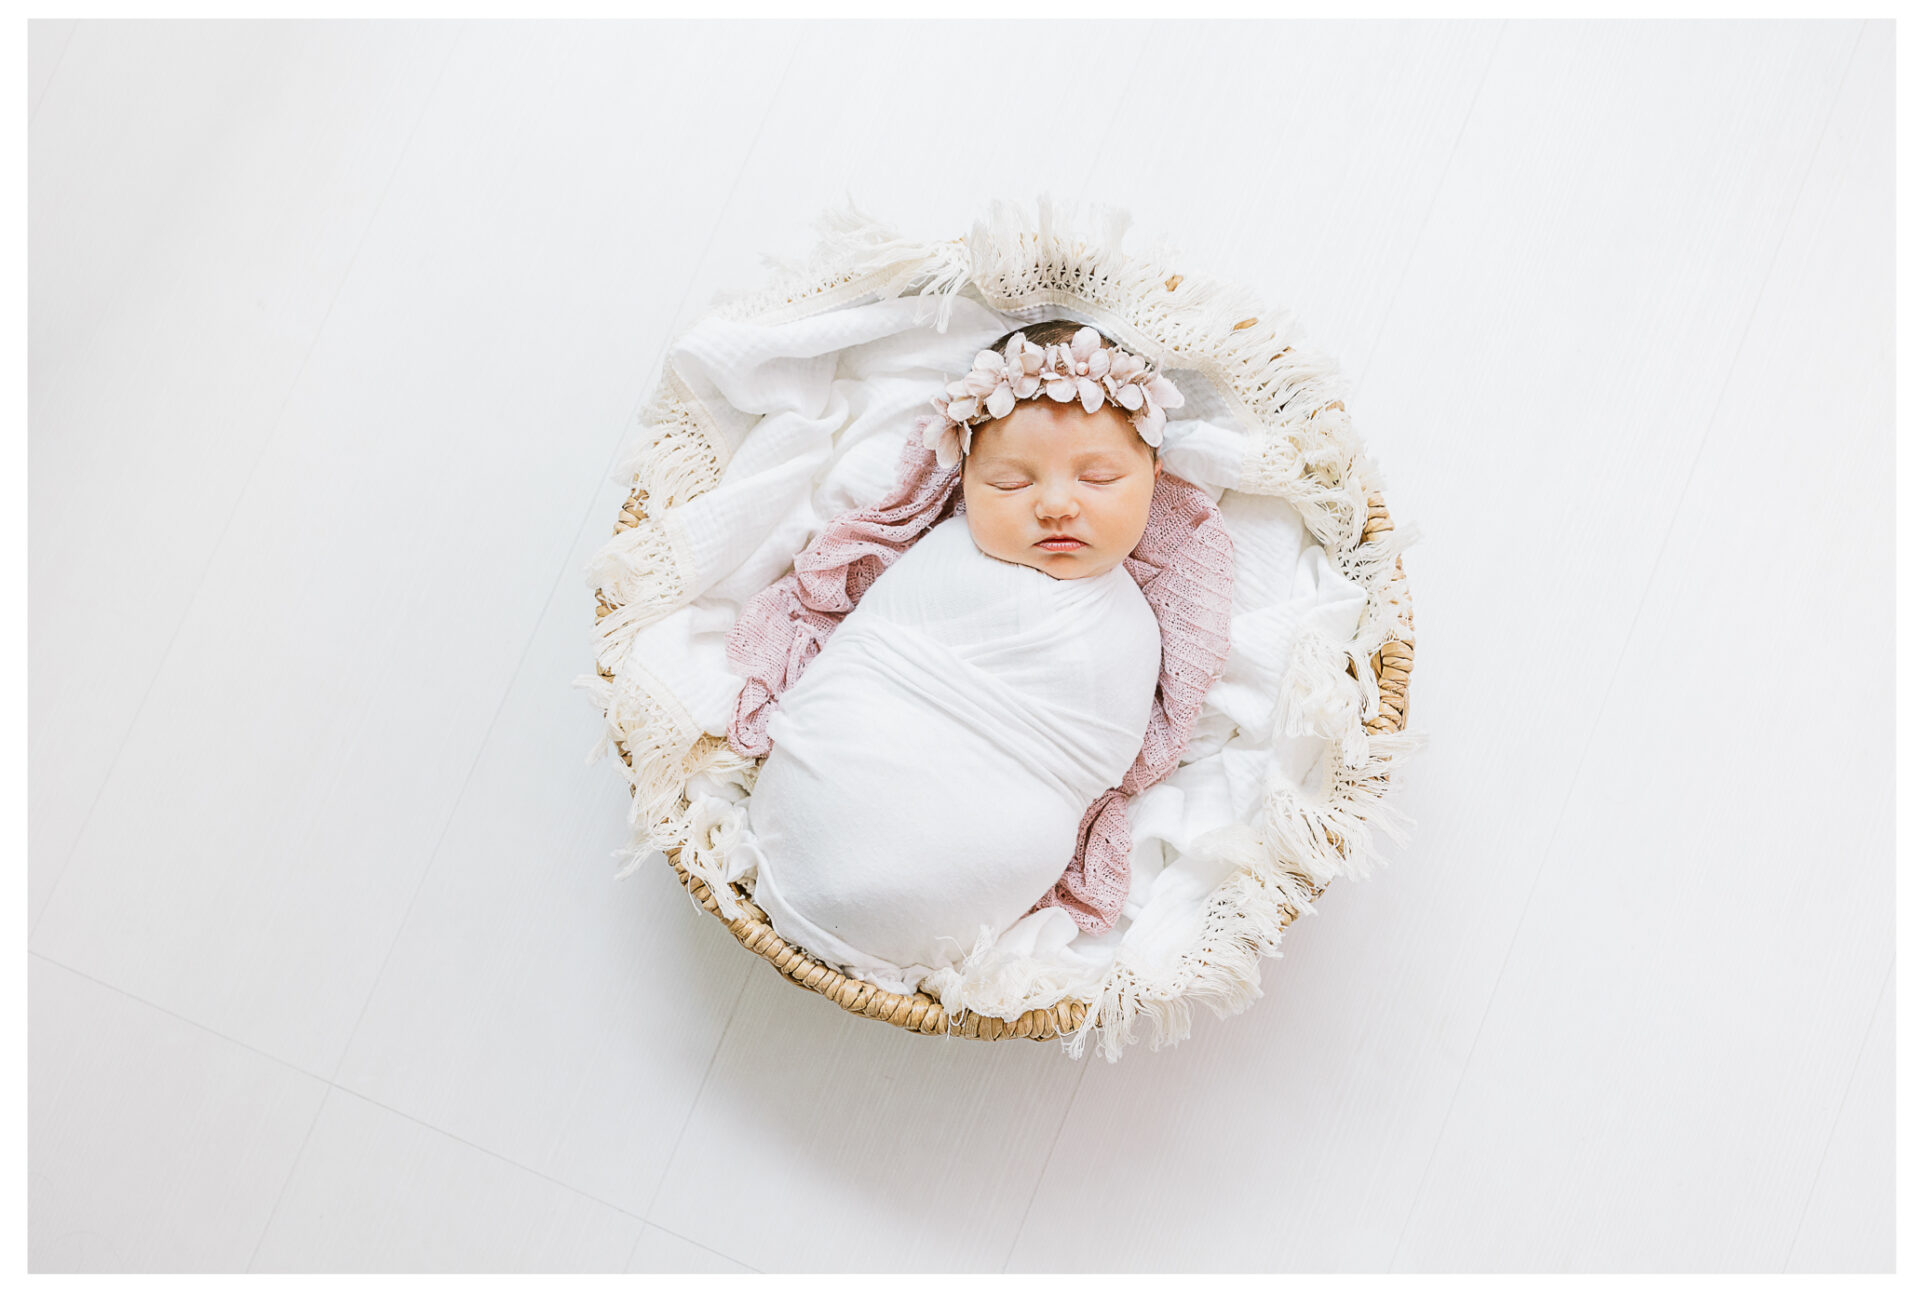 Winter Freire Photography | Dayton, Ohio Newborn Session | Newborn baby girl portraits laying in a basket asleep while wearing a floral headband